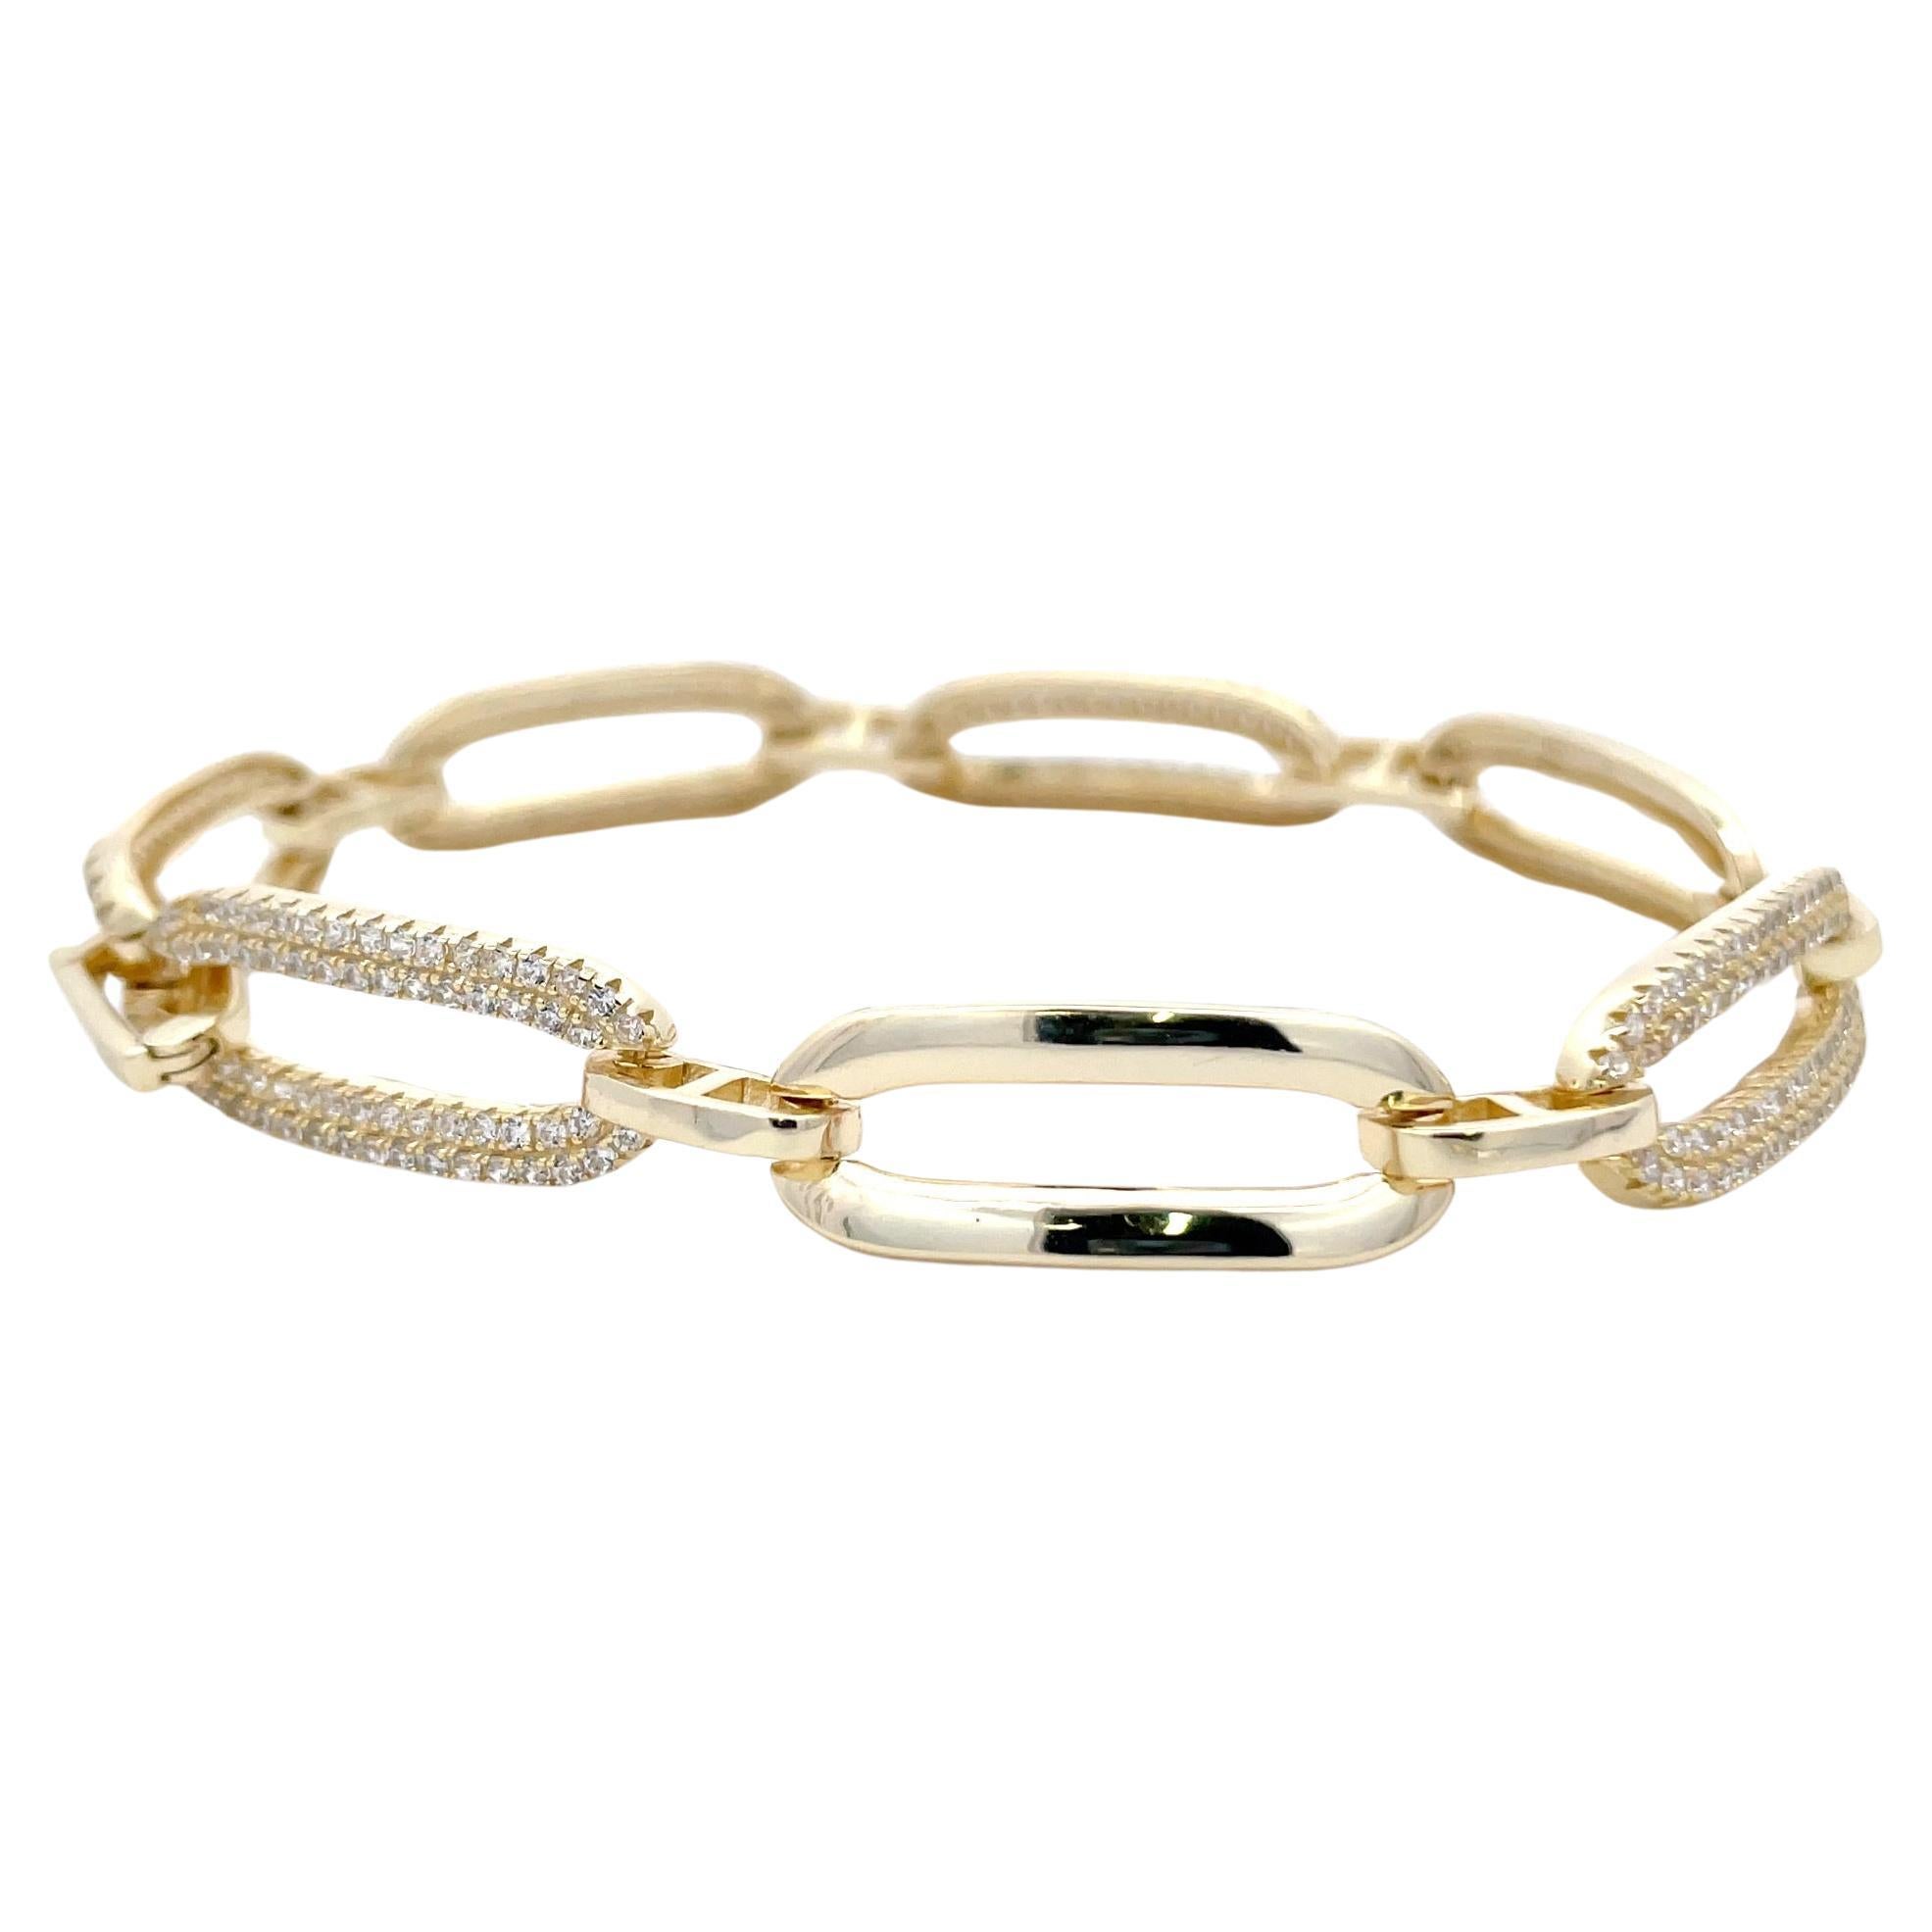 Gold plated sterling silver bracelet featuring alternating high polished and cubic zirconia links with a fold-over clasp.  
Great quality, will not tarnish!